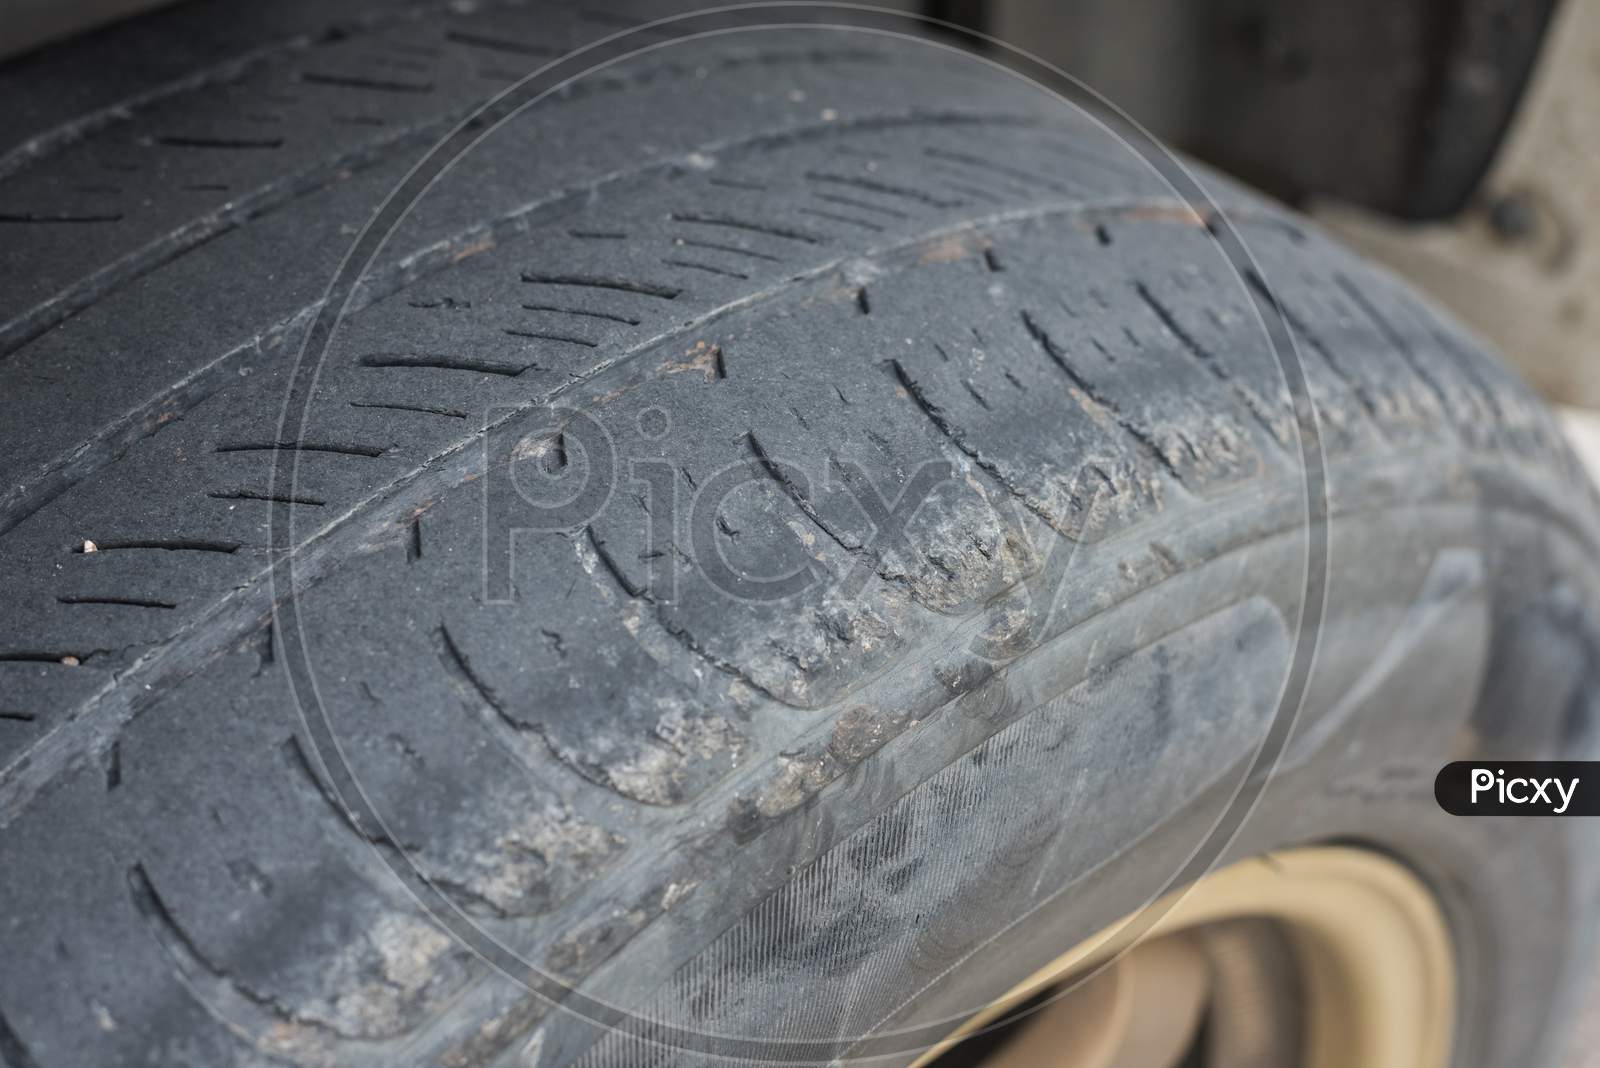 Close Up Of Old Tire Wheels. Automotive And Material Concept. Car And Vehicle Theme.